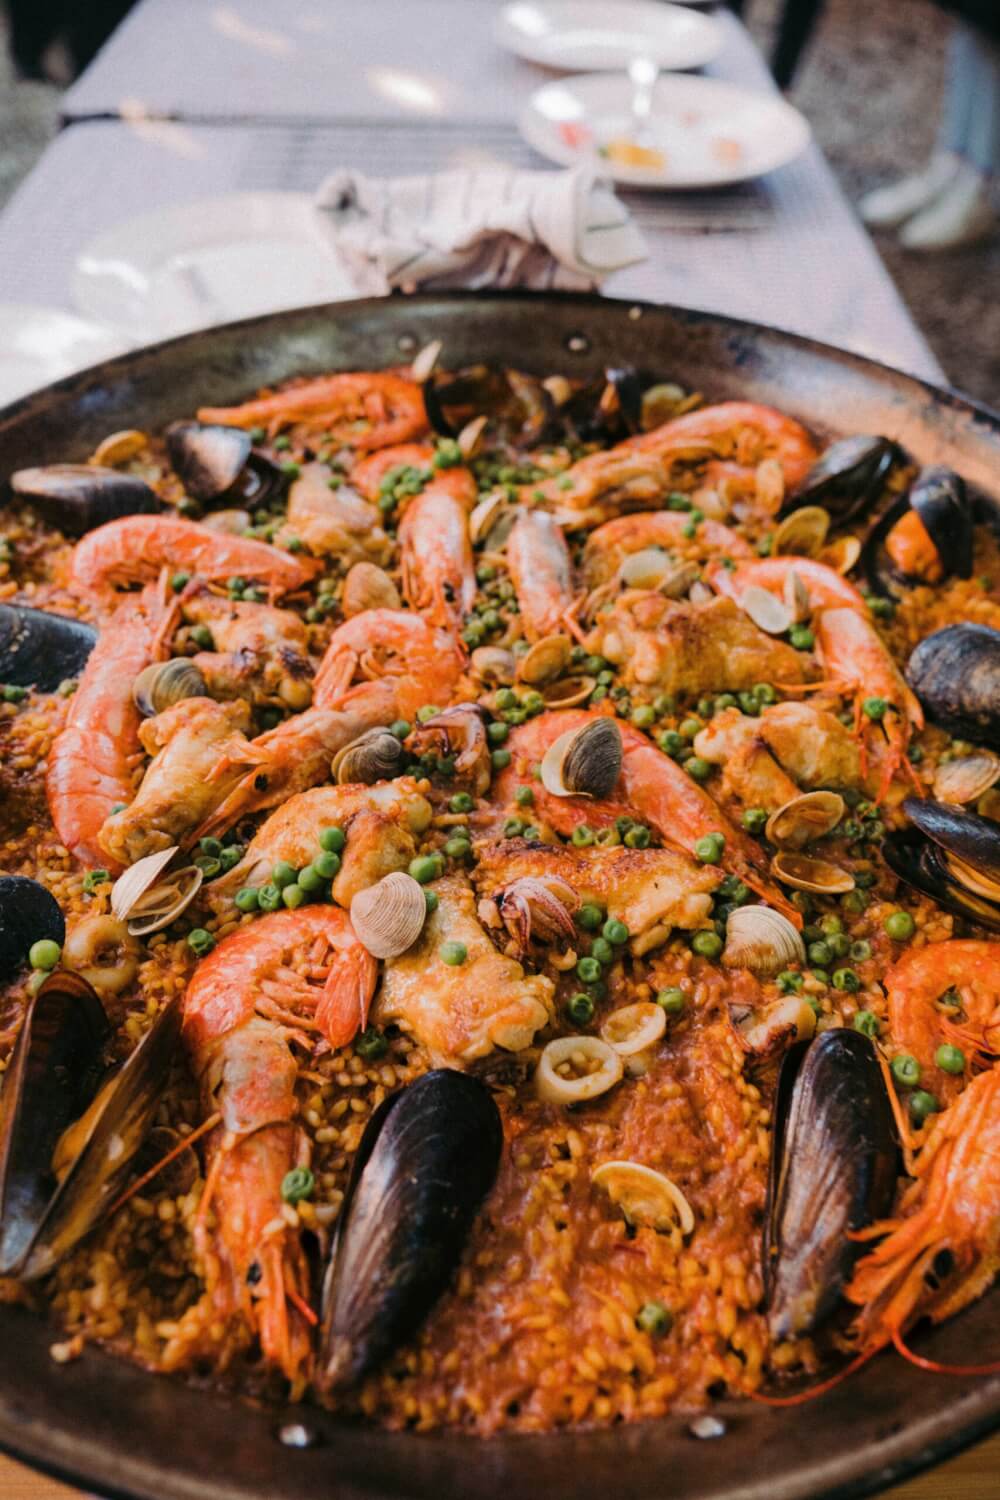 A plate of paella, with prawns, clams, mussels, and peas.